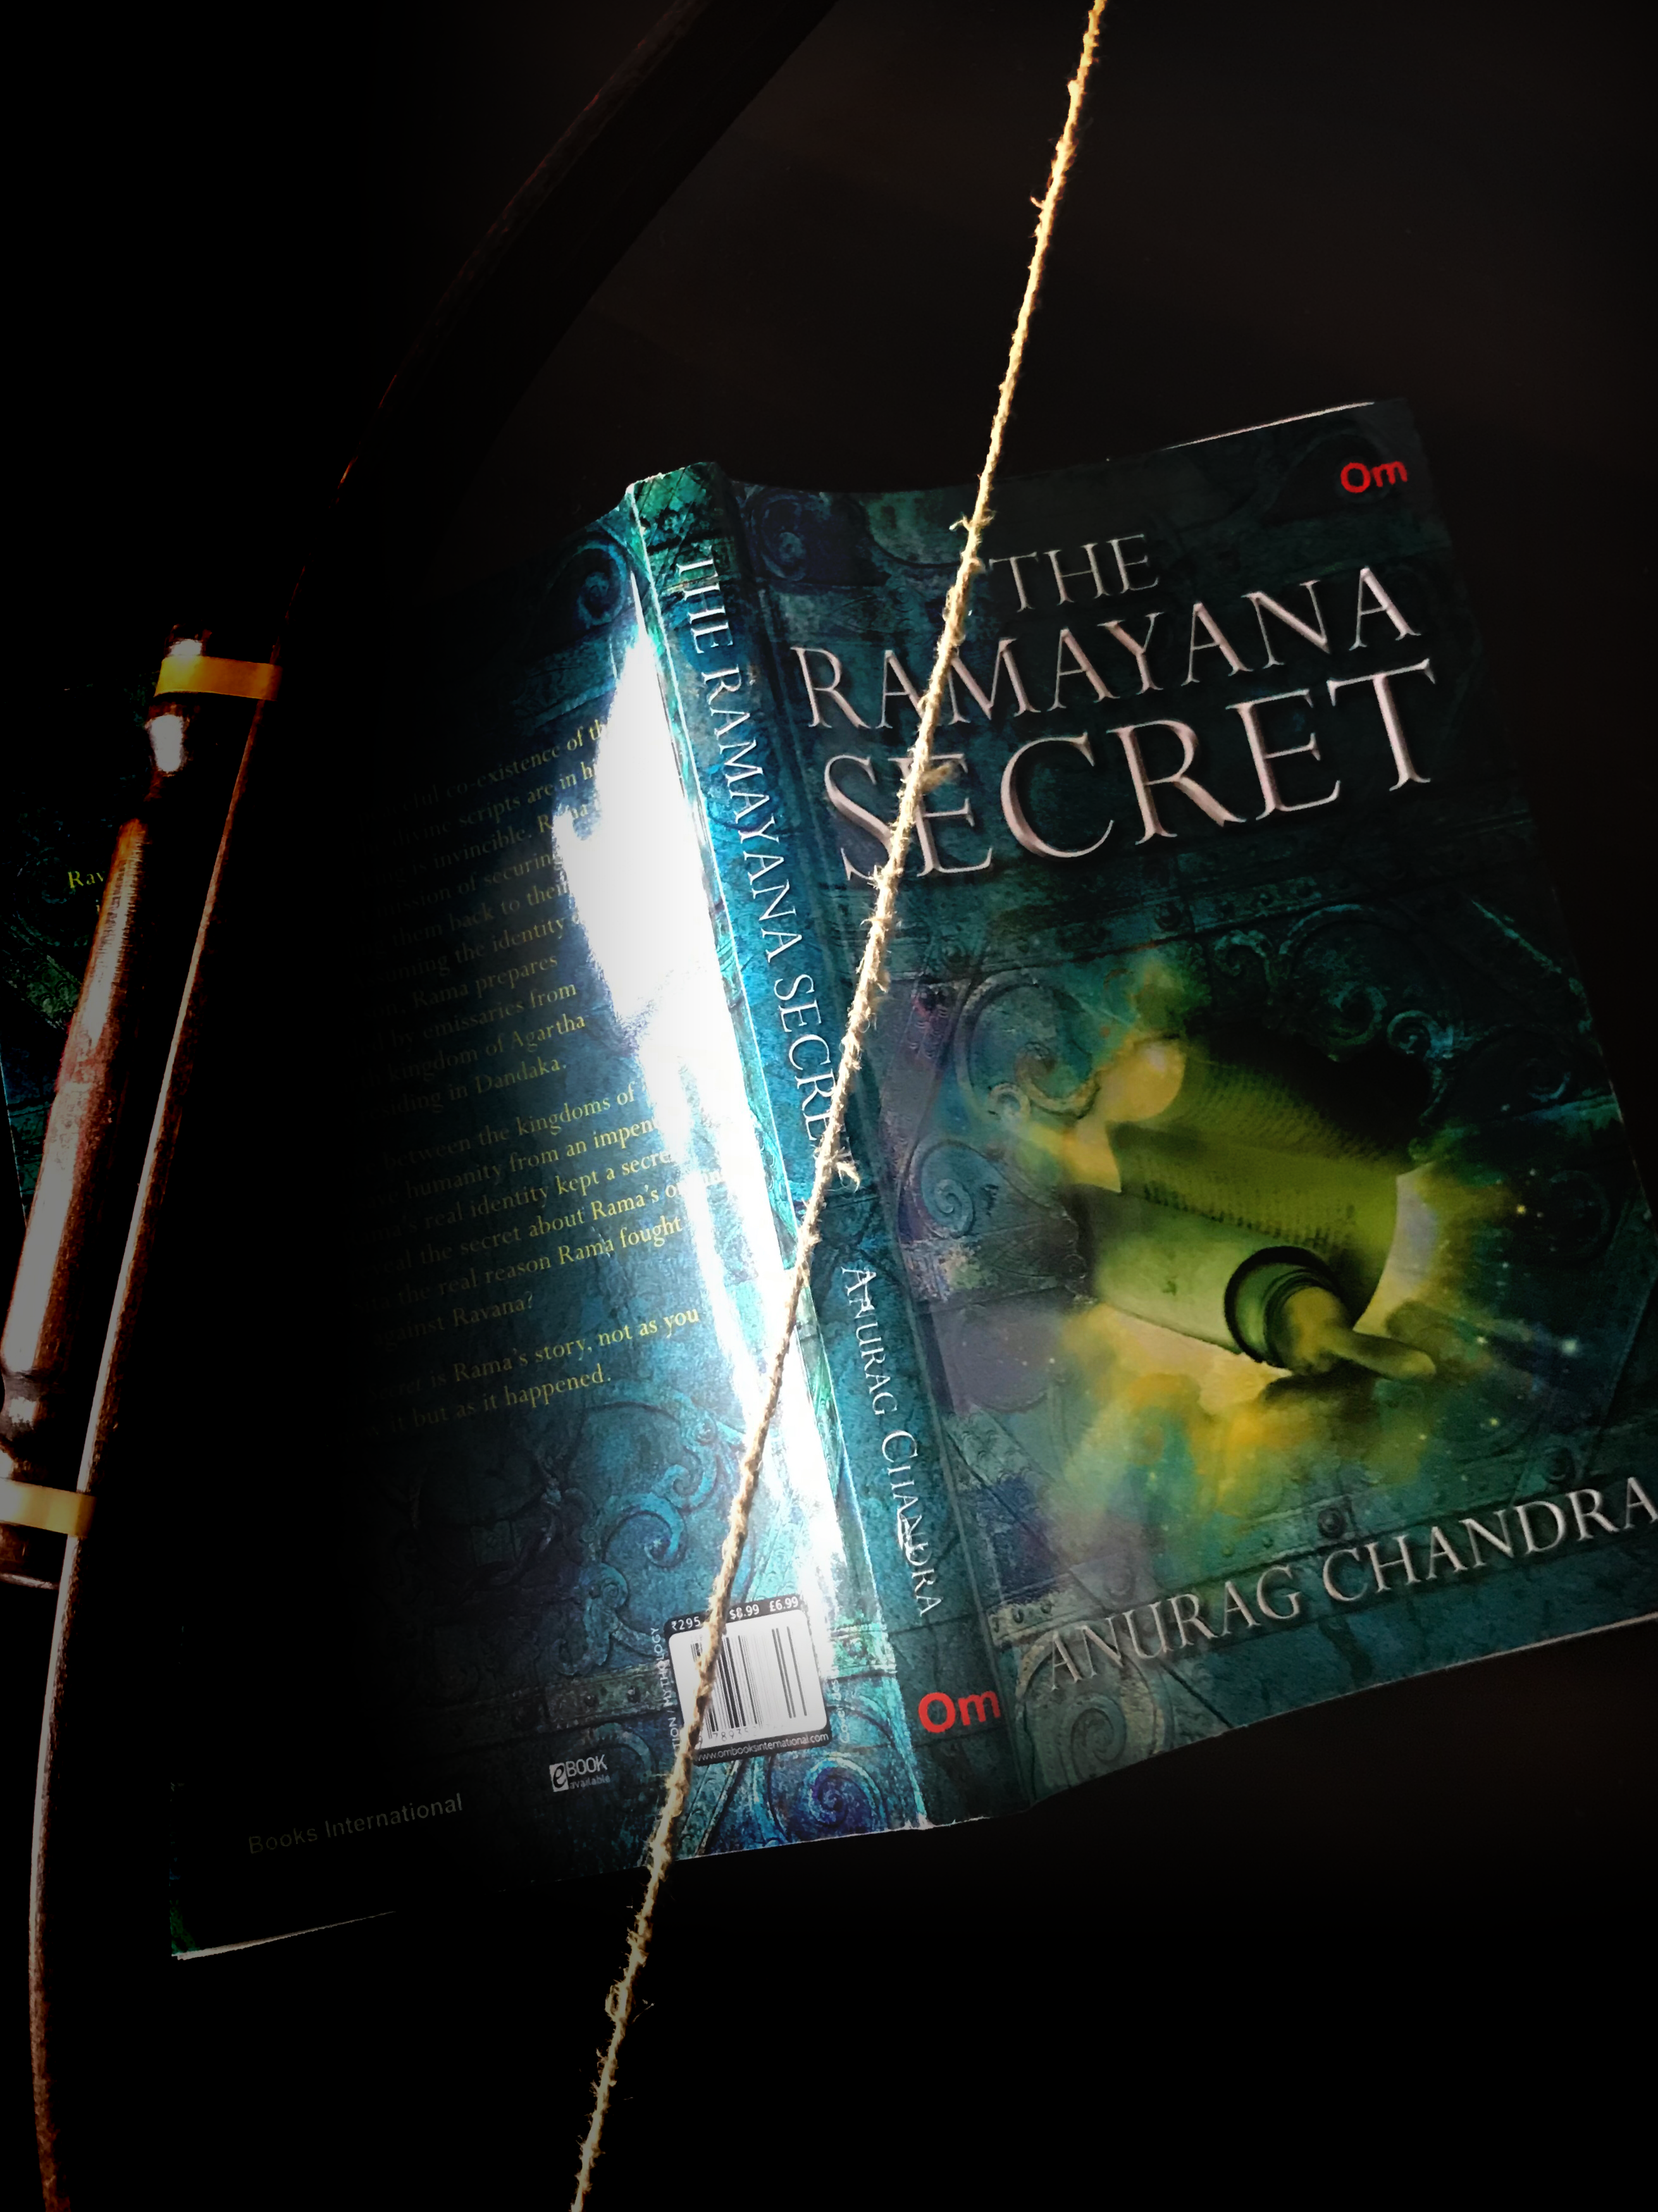 You are currently viewing The Ramayana Secret by Anurag Chandra